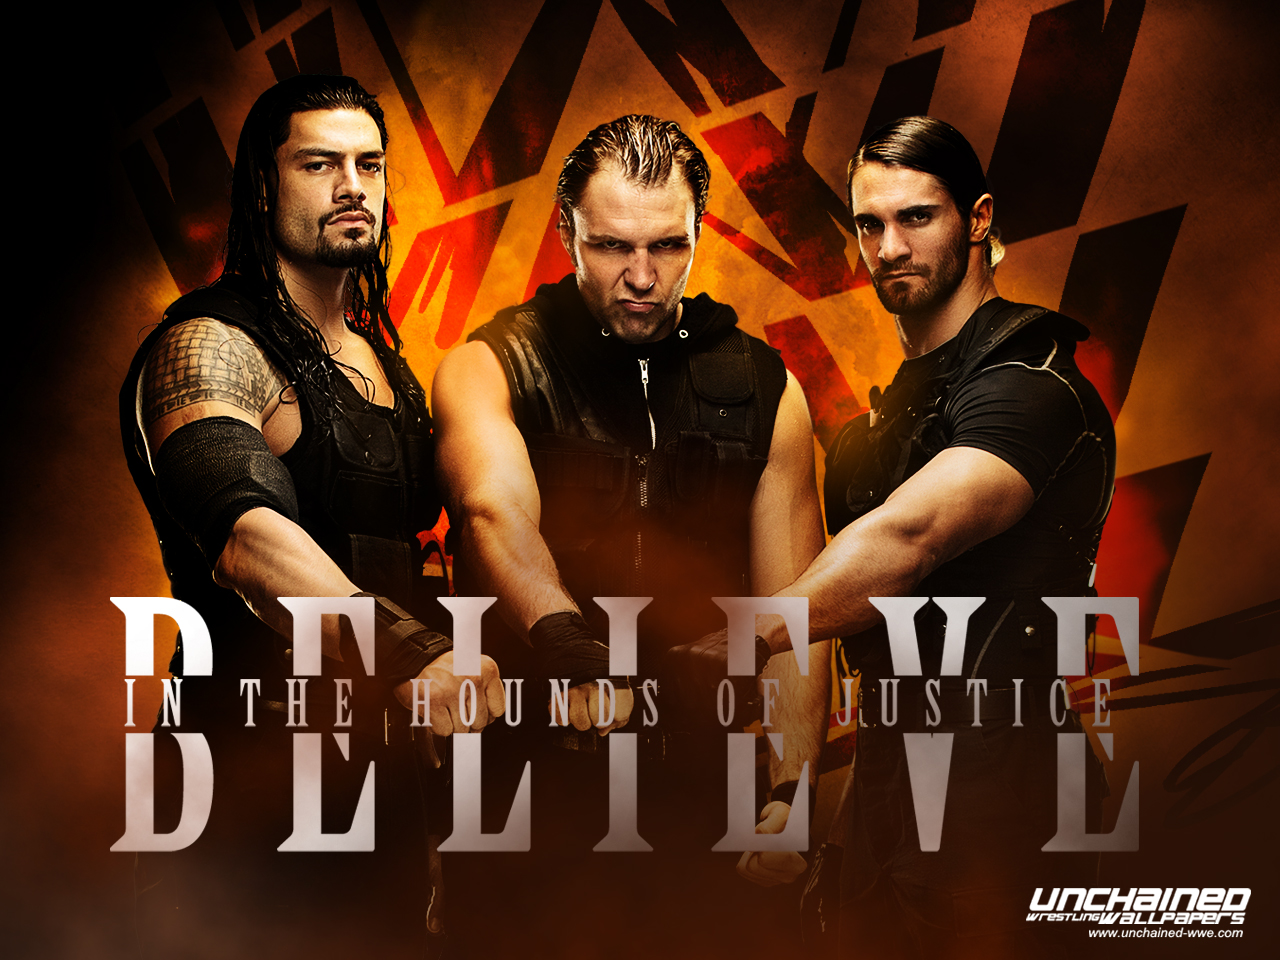 Believe In The Hounds Of Justice - Shield Wwe - HD Wallpaper 